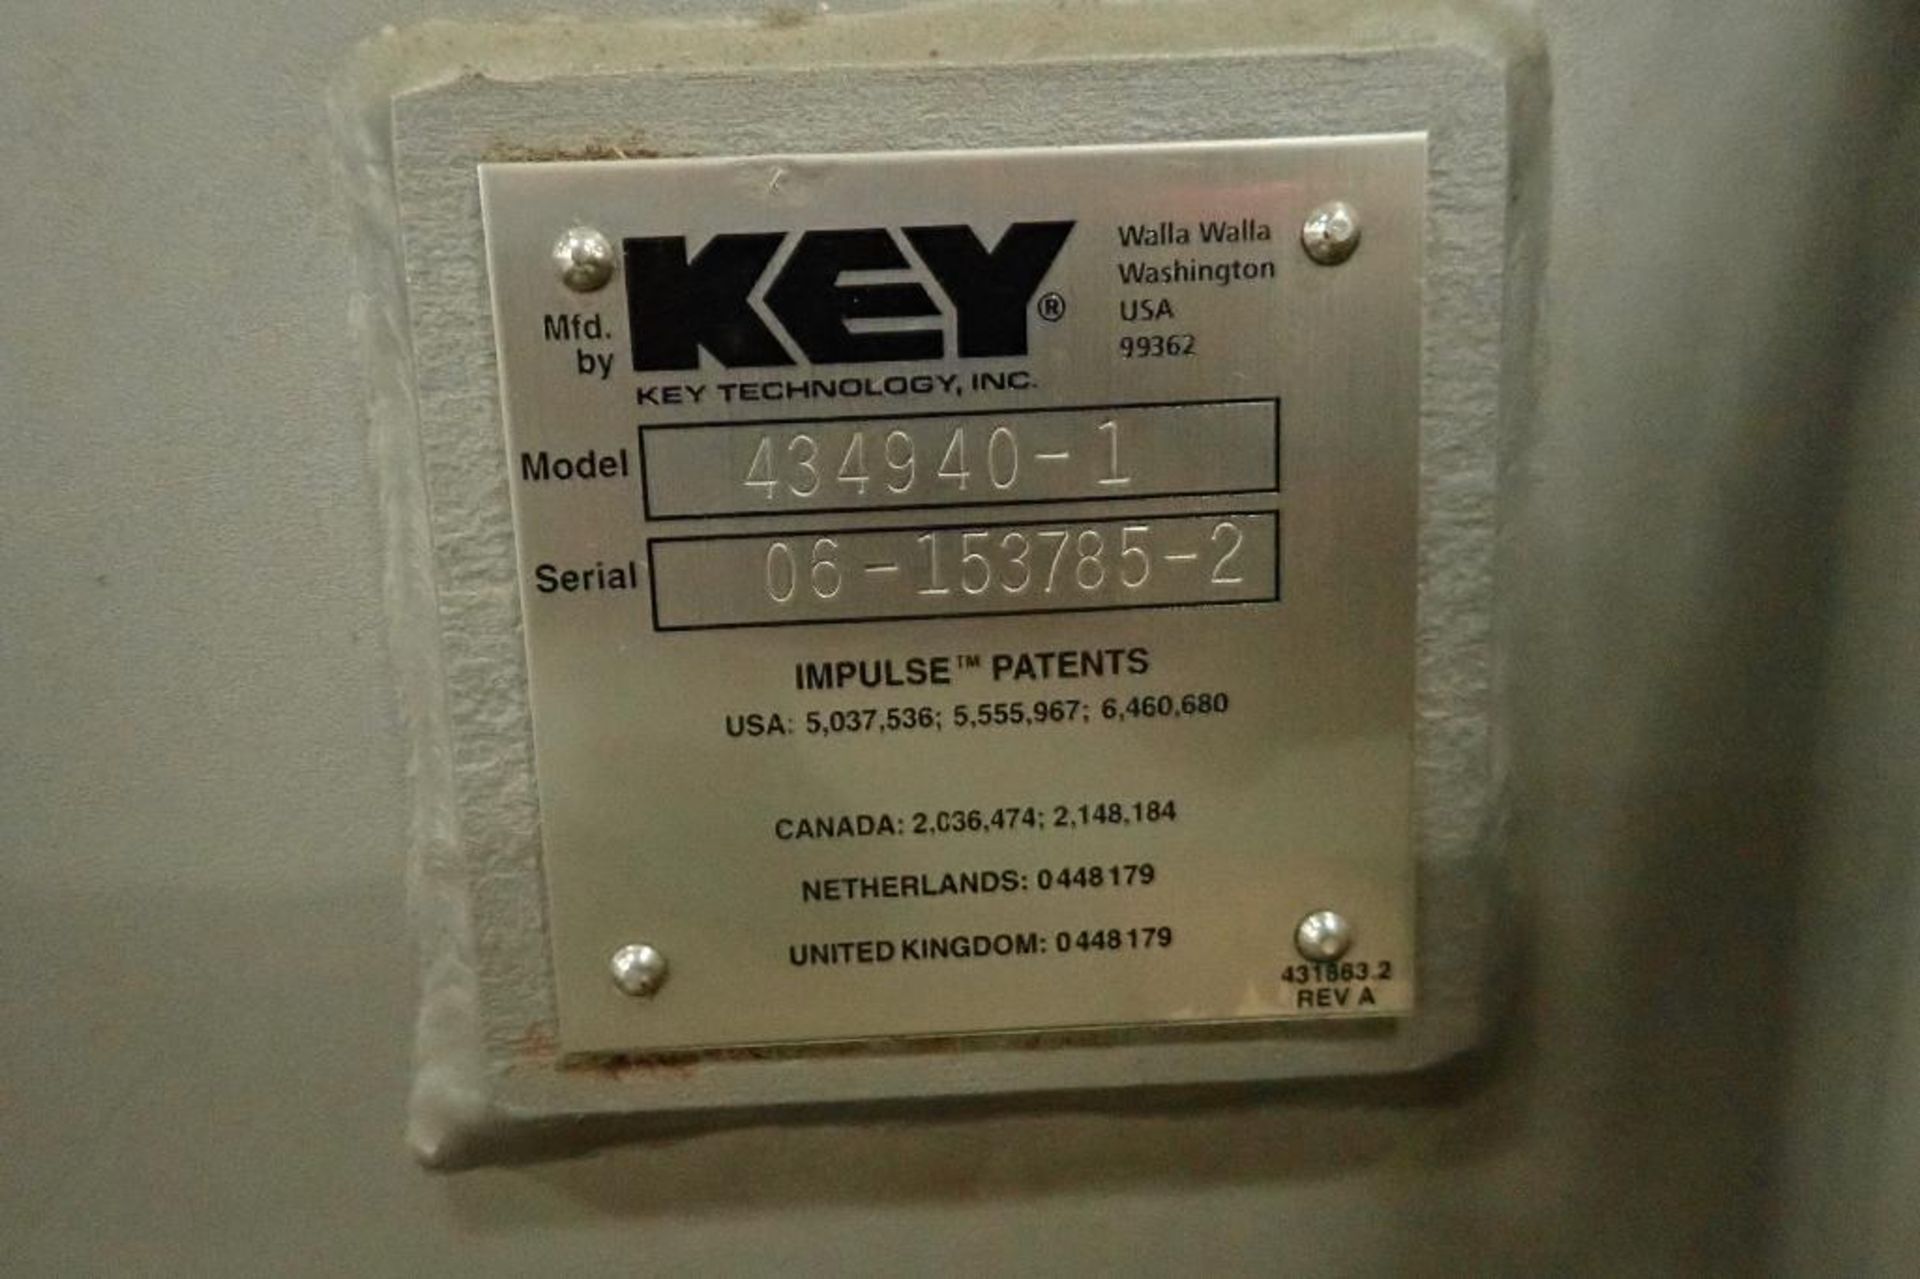 Key iso flow vibratory conveyor, Model 434940-1, SN 06-153785-2, SS bed 68 in. long x 12 in. wide x - Image 3 of 5